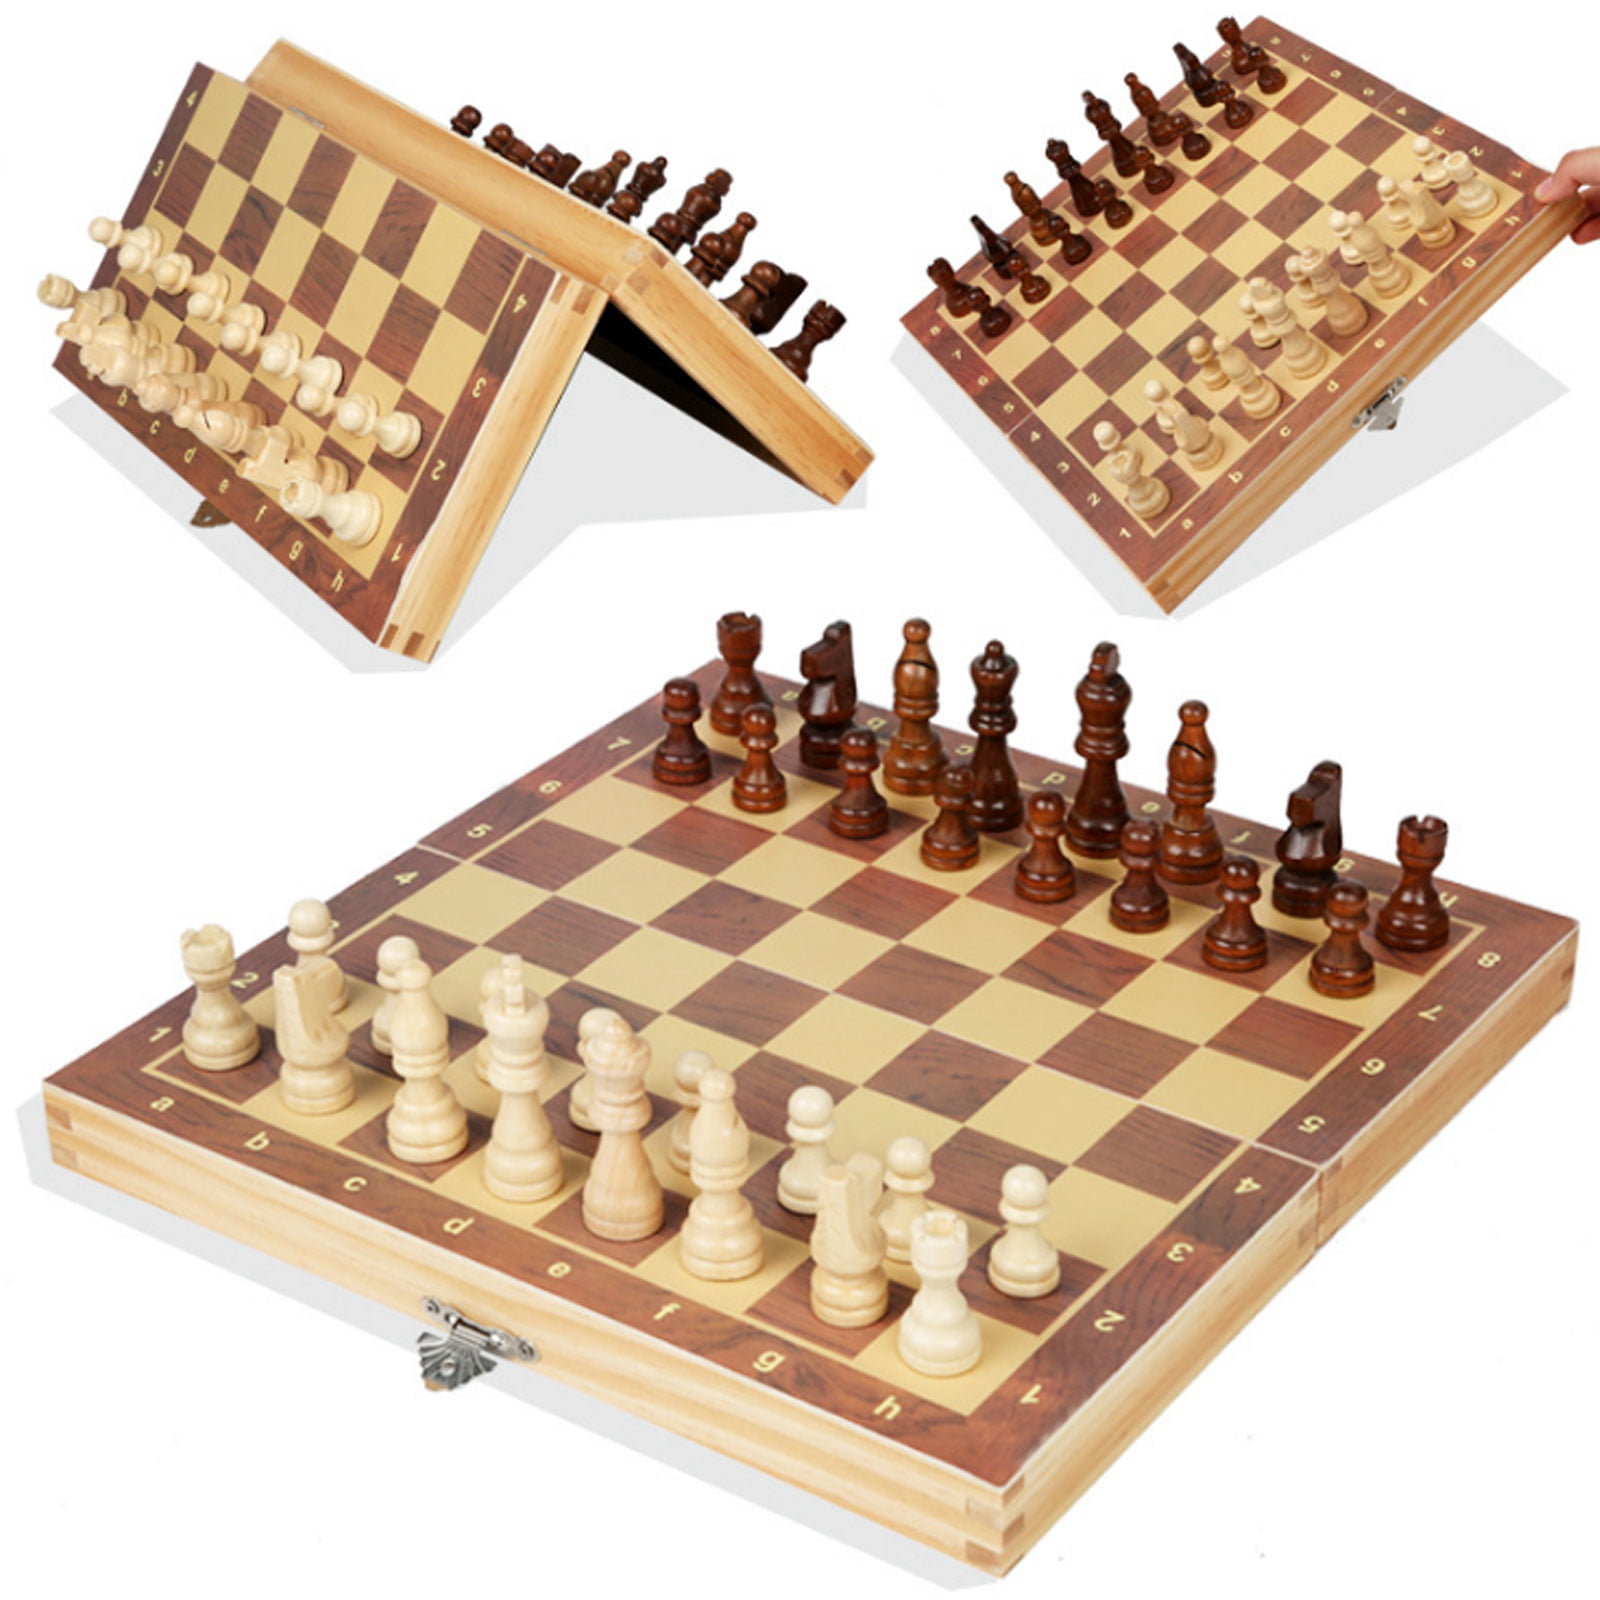 New Large Chess Wooden Set Folding Board Wood Pieces Chessboard HOT UK Game !! 